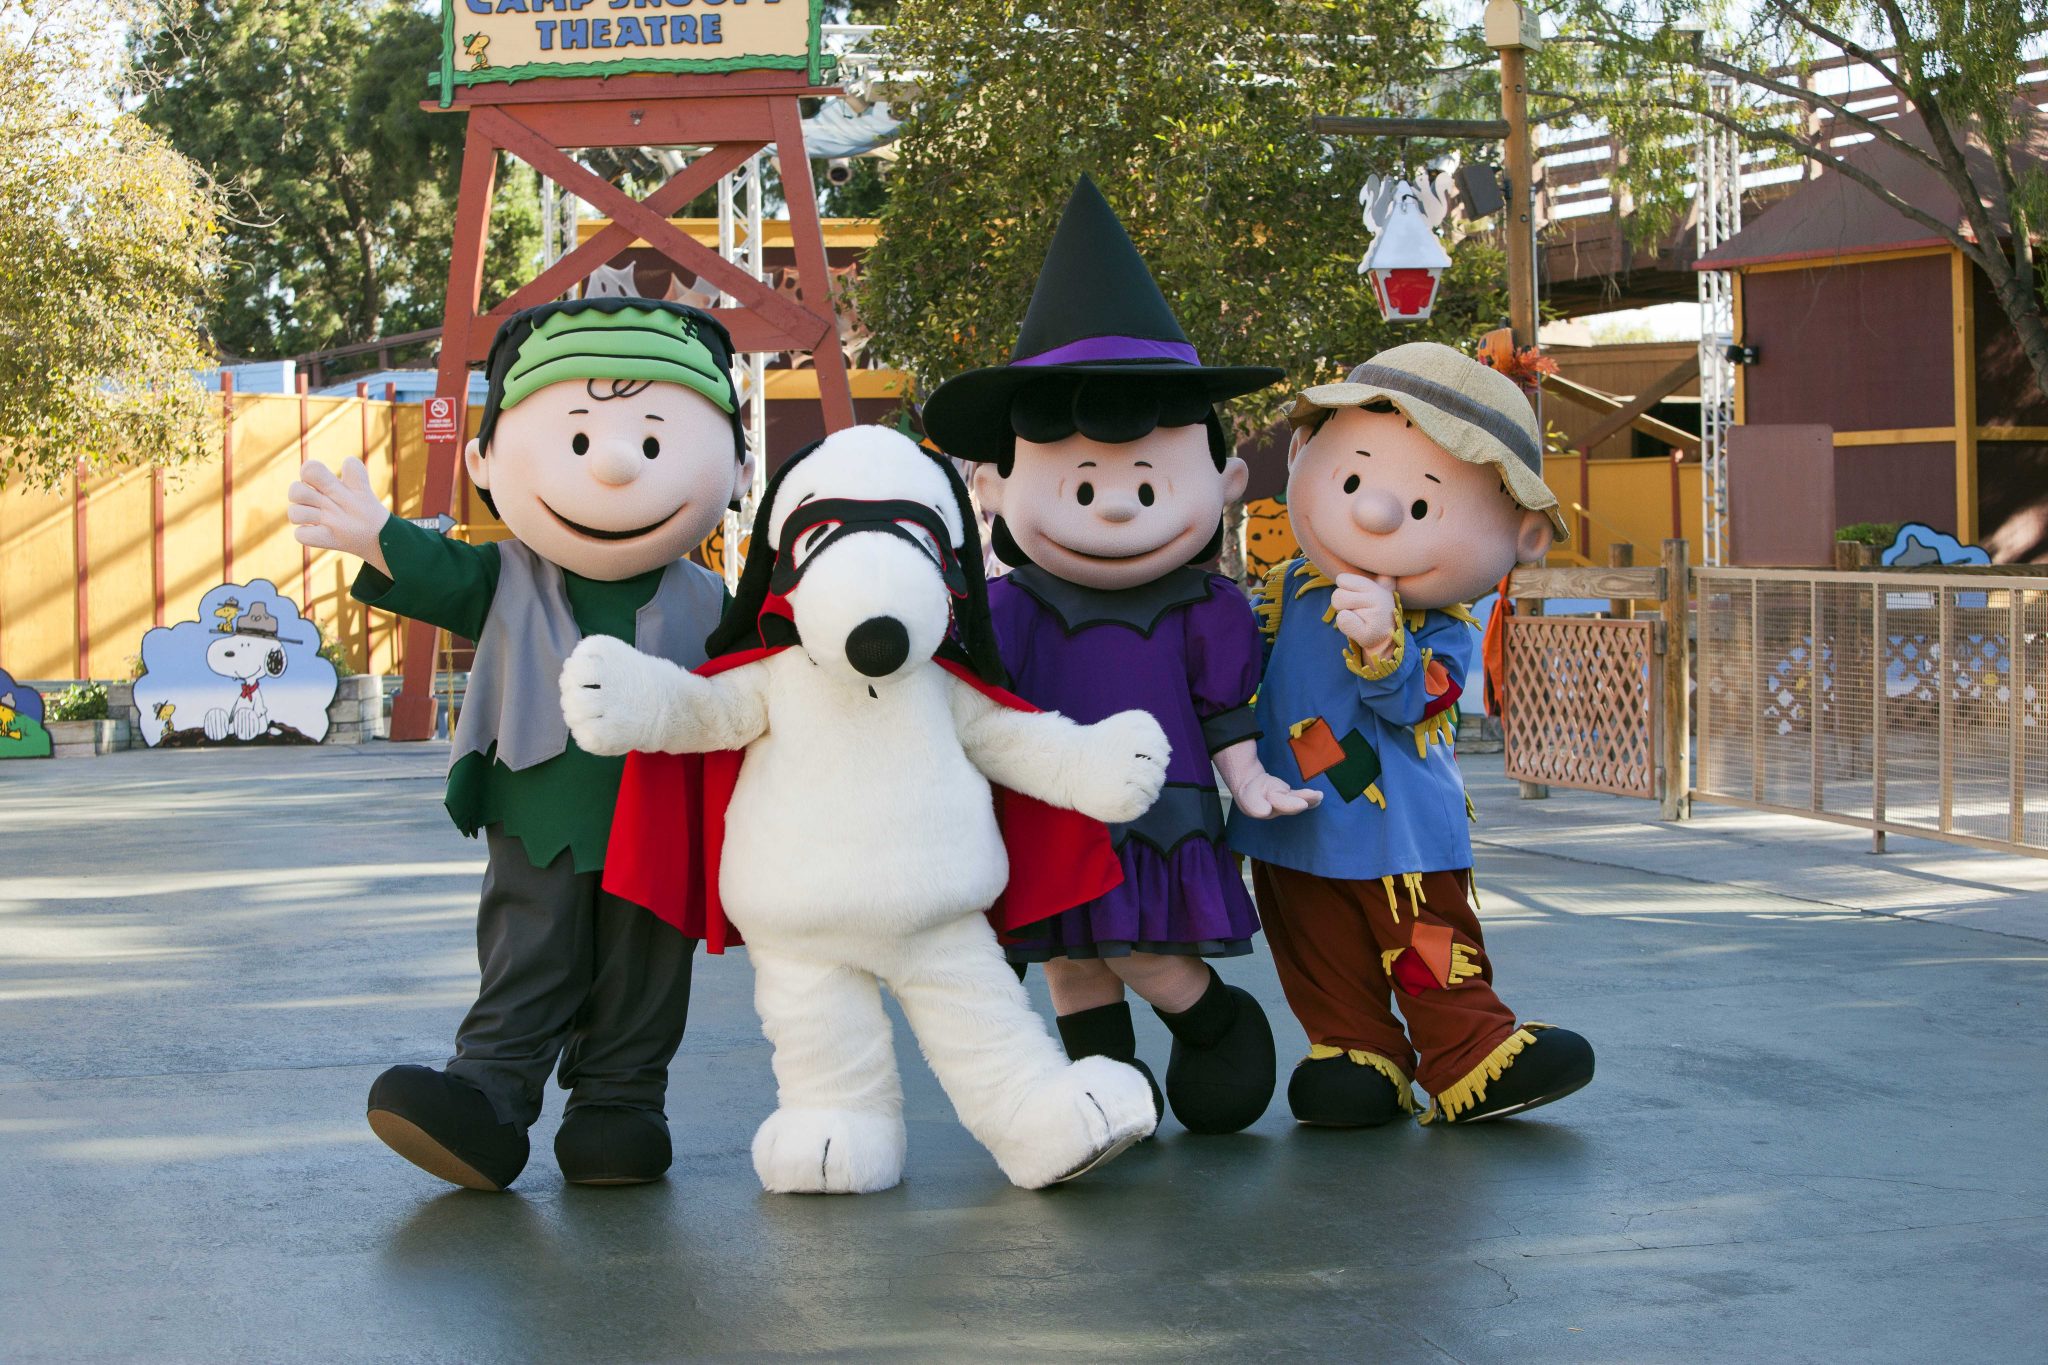 Knott’s Berry Farm Hiring Tweet Hints at New Show for Camp Snoopy’s Spooky Farm